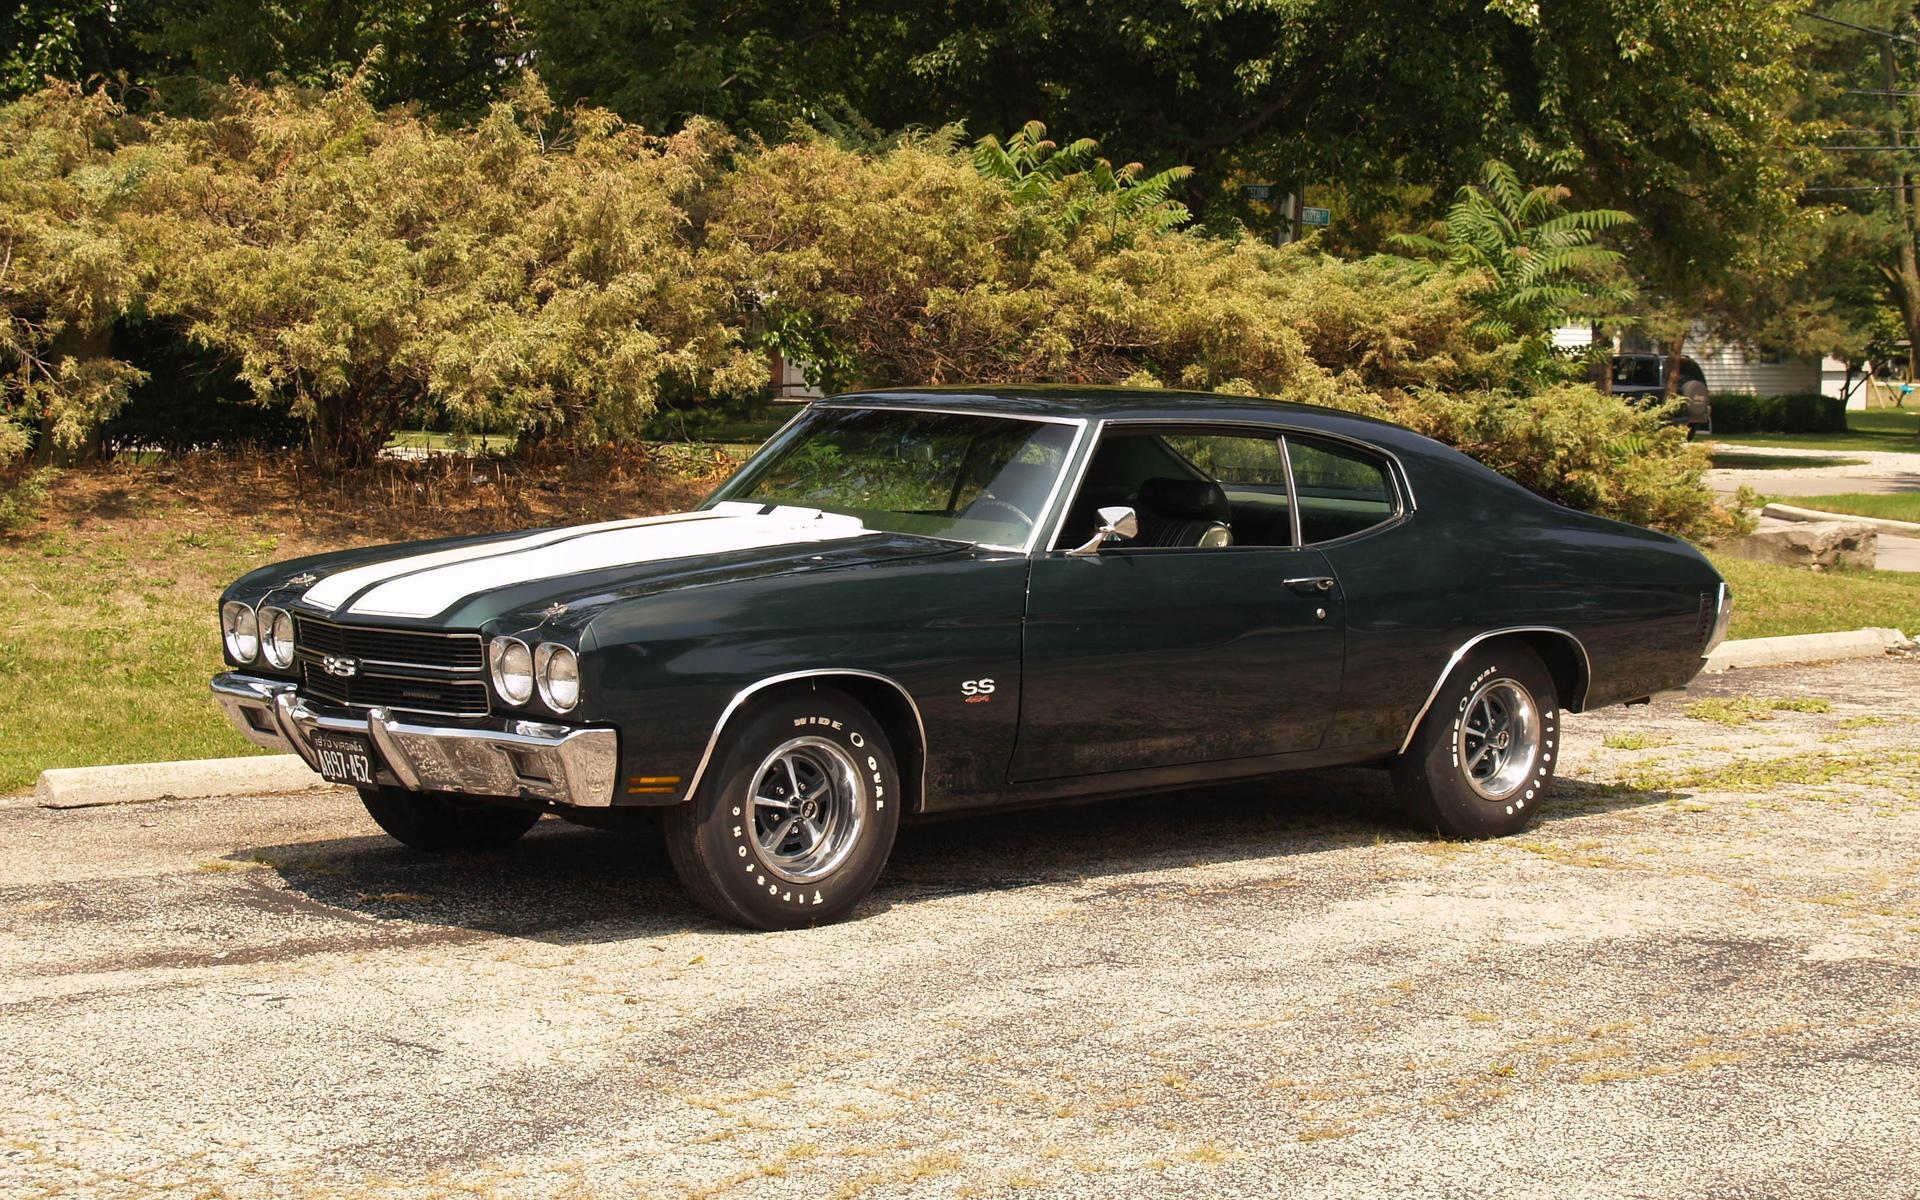 Chevrolet Chevelle Wallpapers HD Download 1920x1200